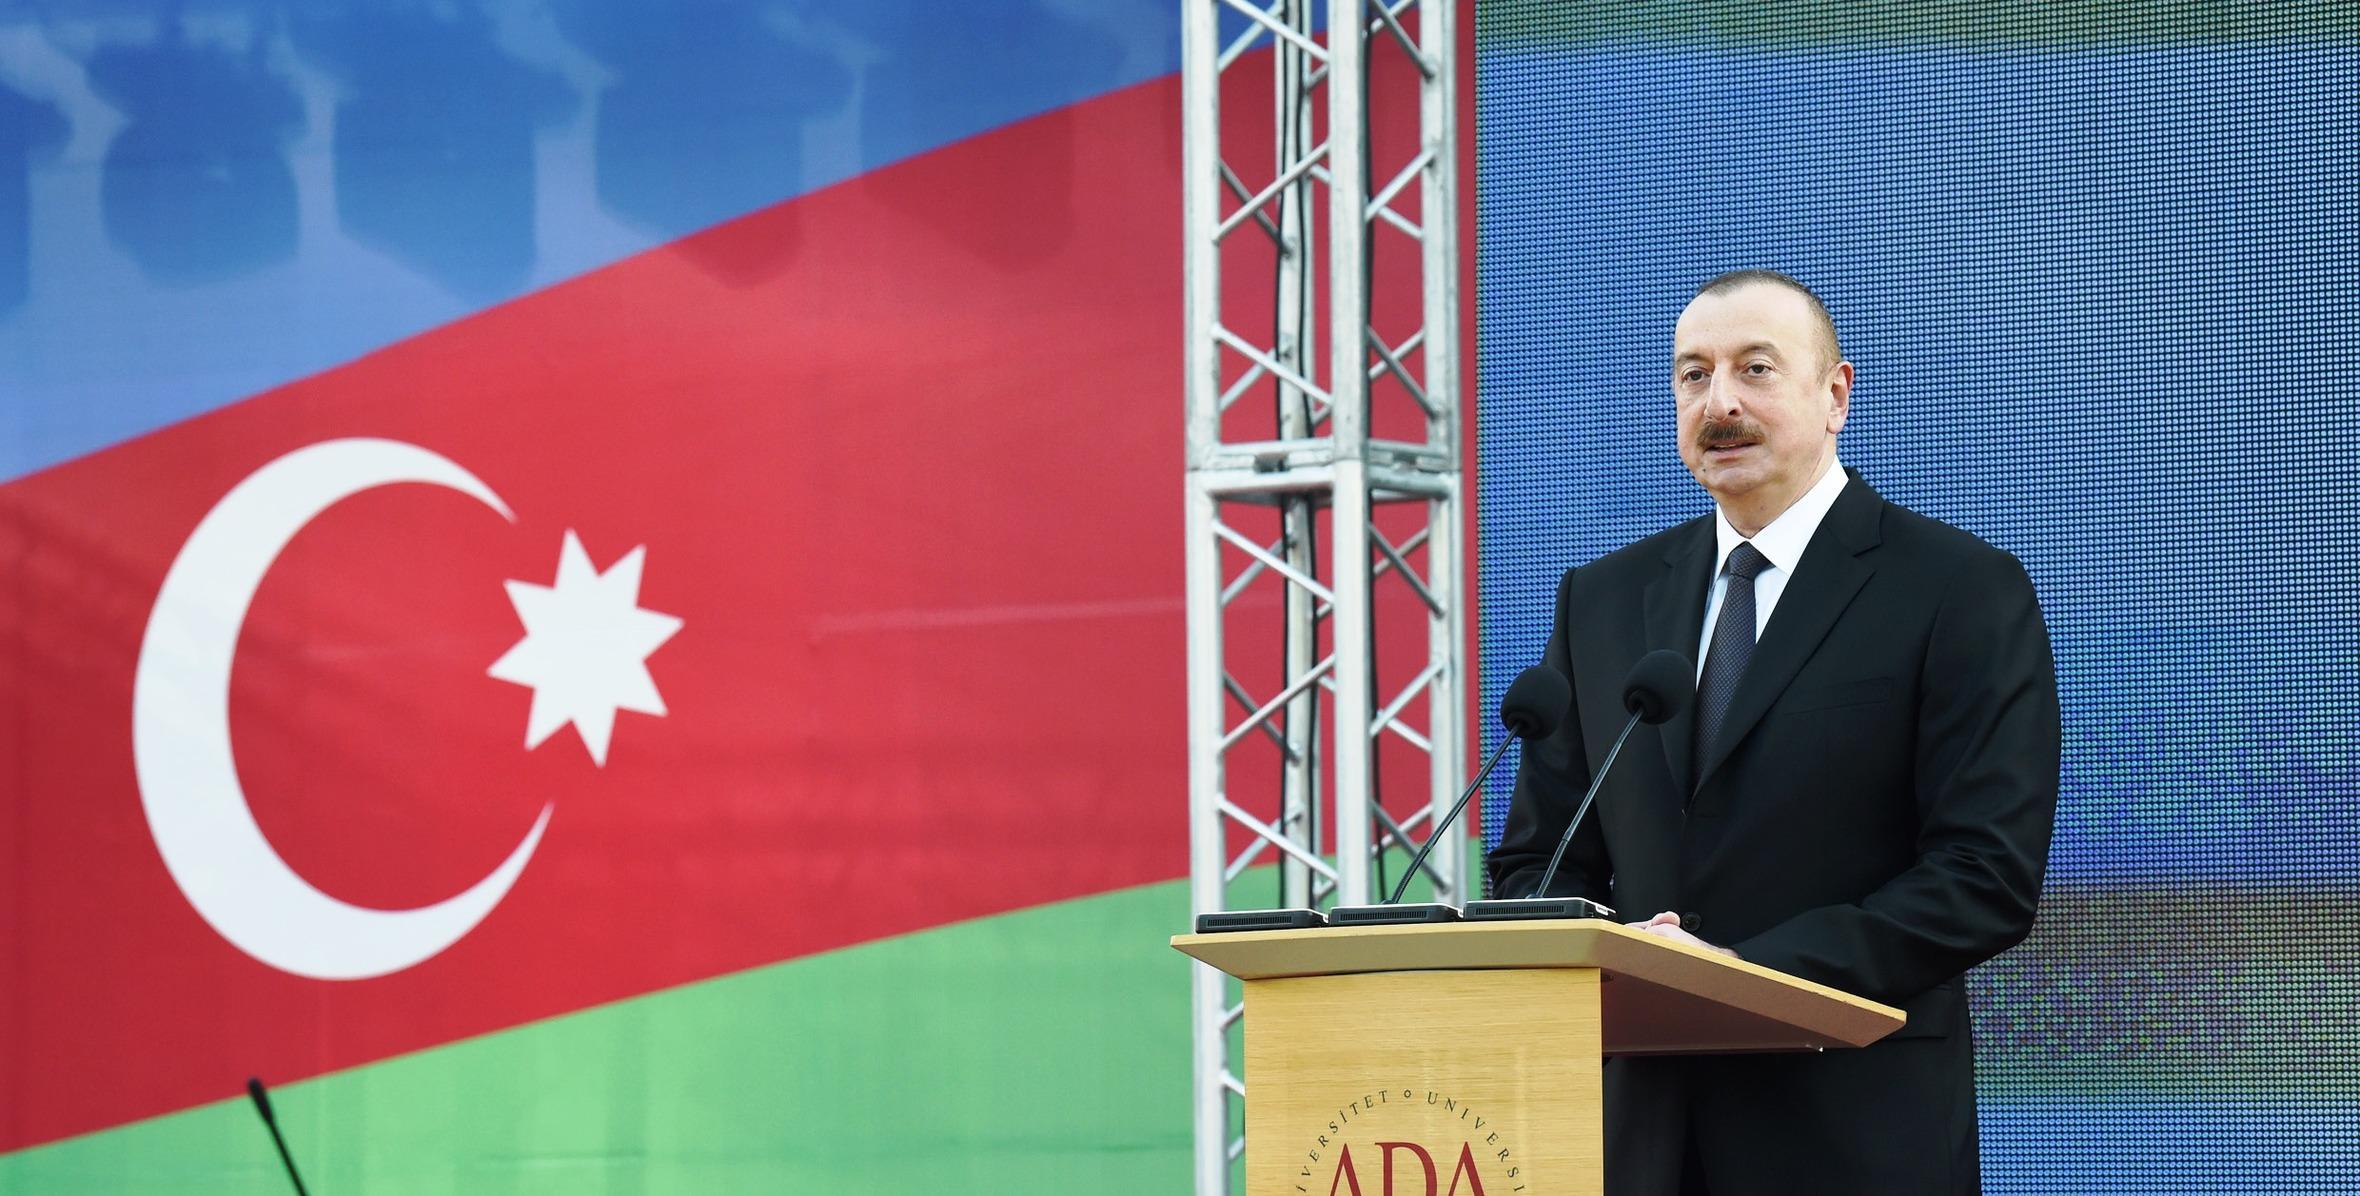 Speech by Ilham Aliyev at the commencement ceremony at ADA University